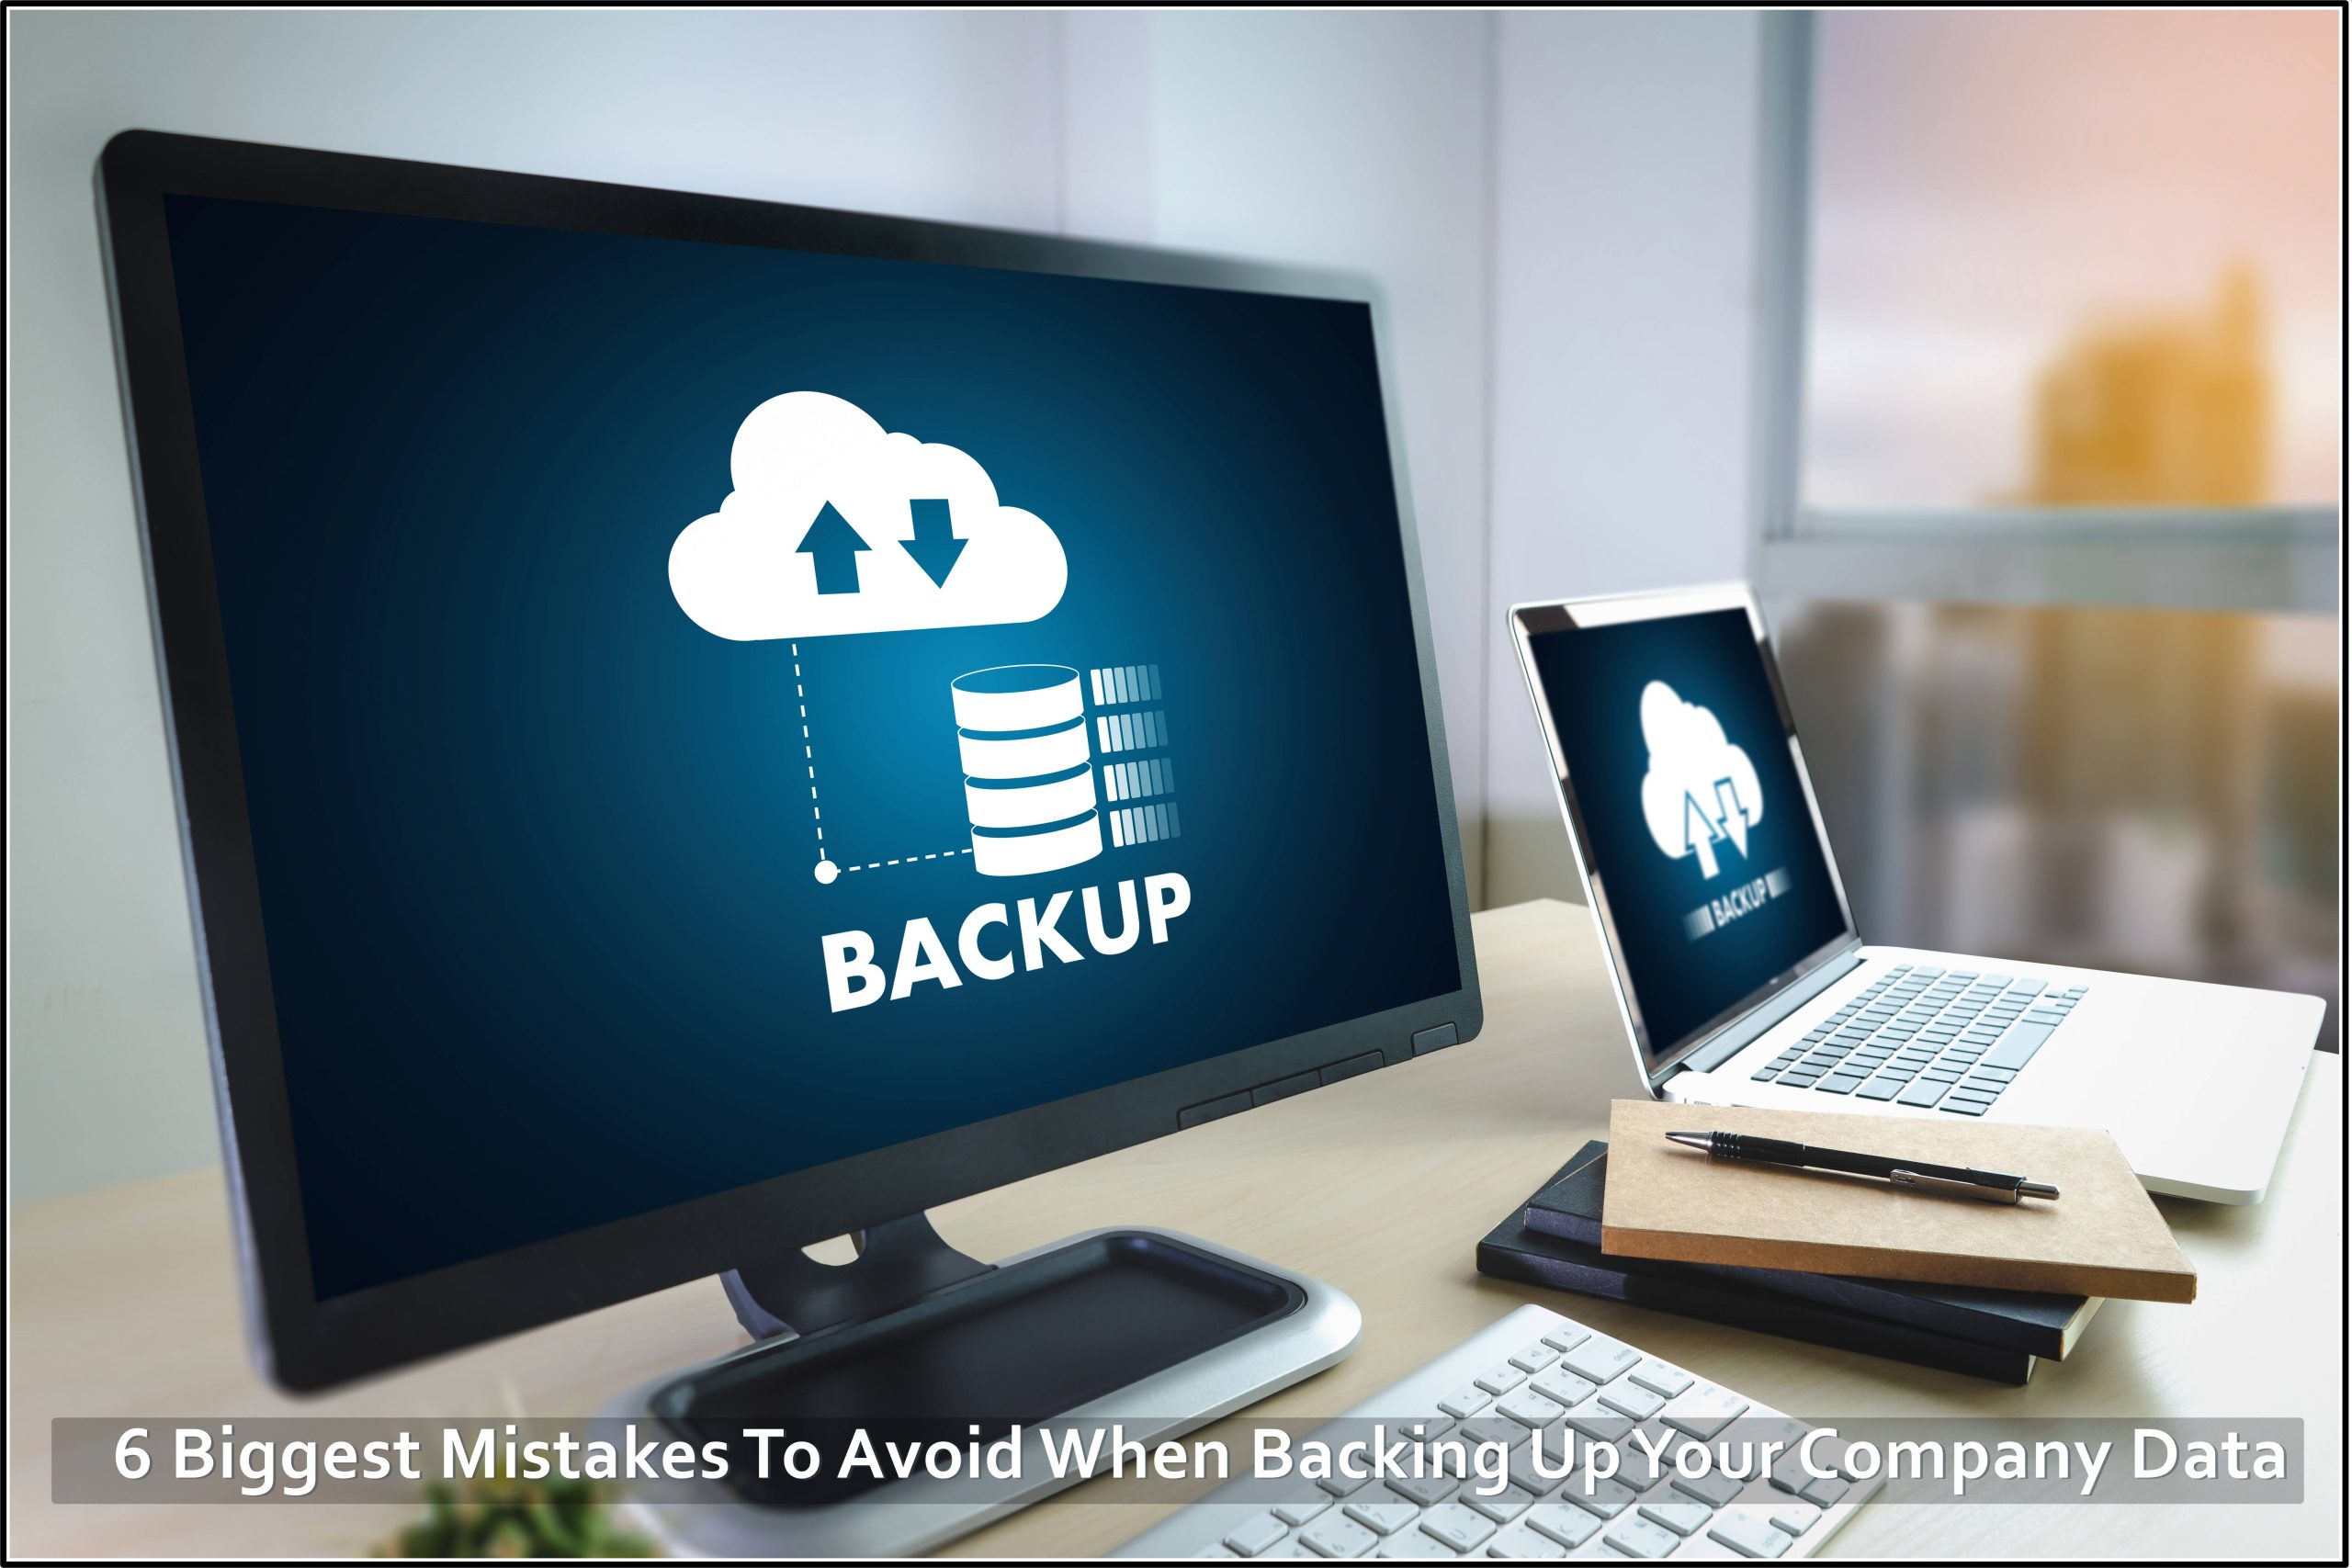 6 Biggest Mistakes To Avoid When Backing Up Your Company Data